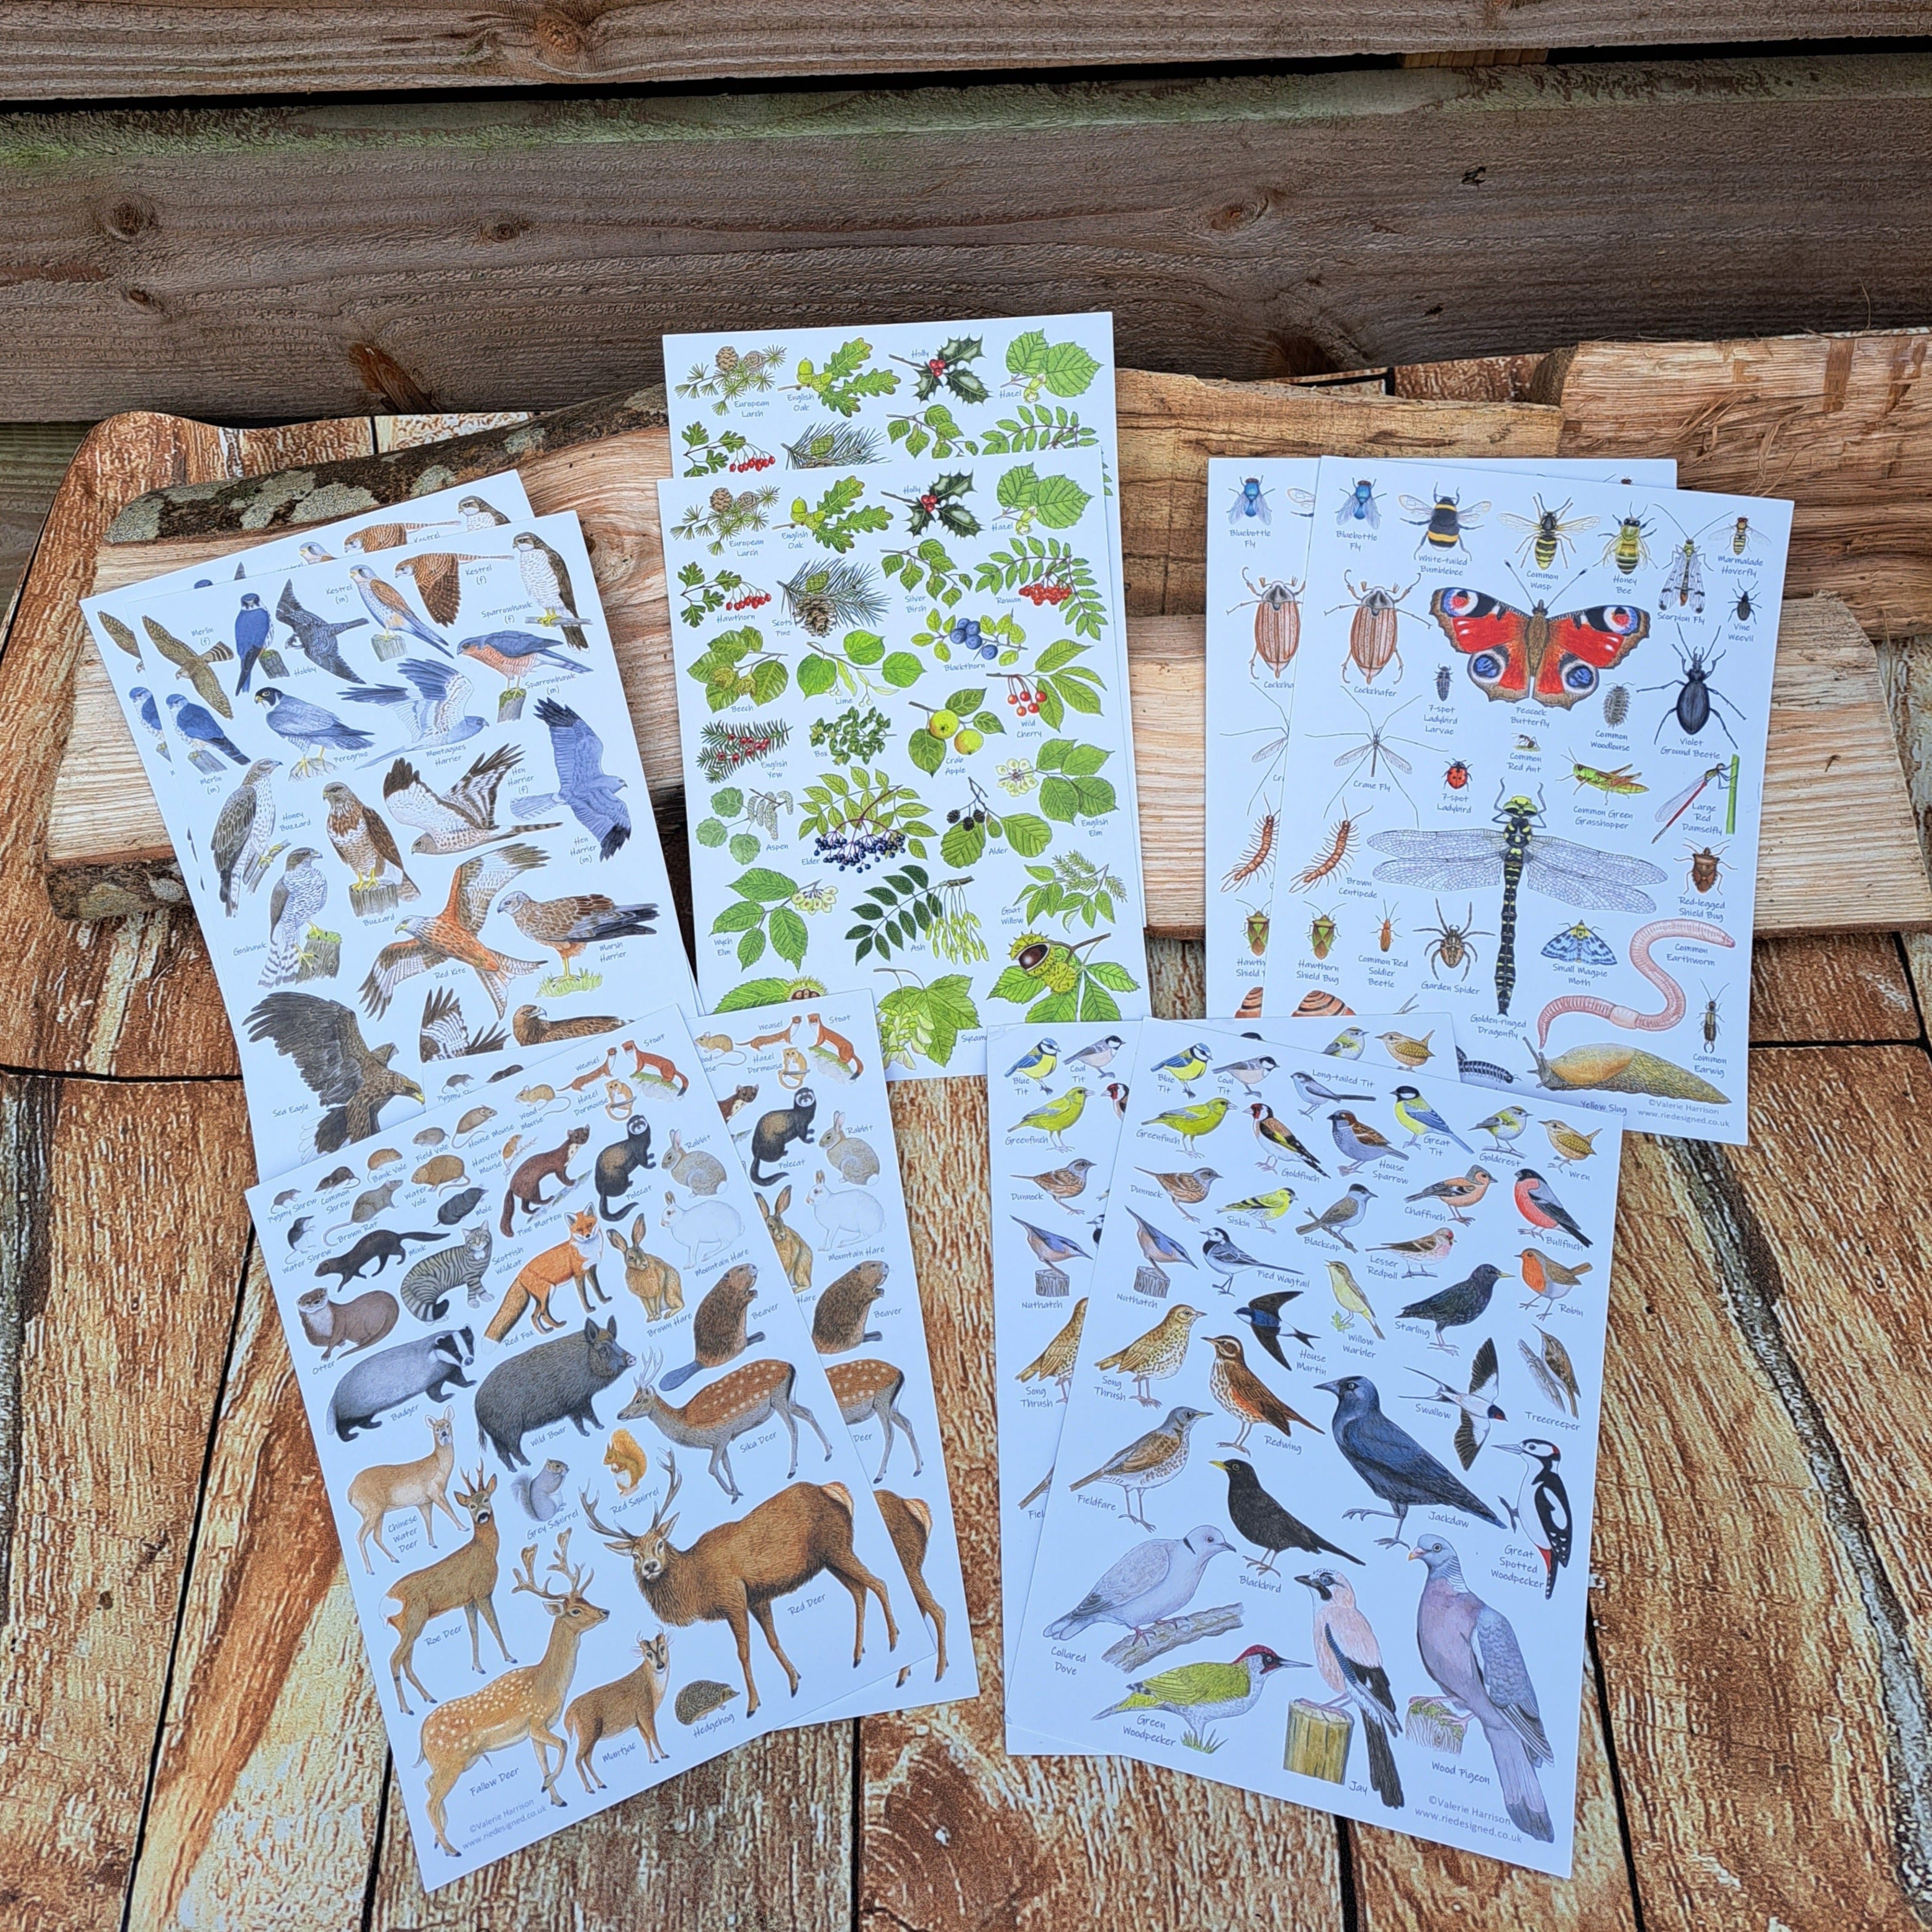 10 x Wildlife Party Bag Fillers - A5 Wildlife Guides